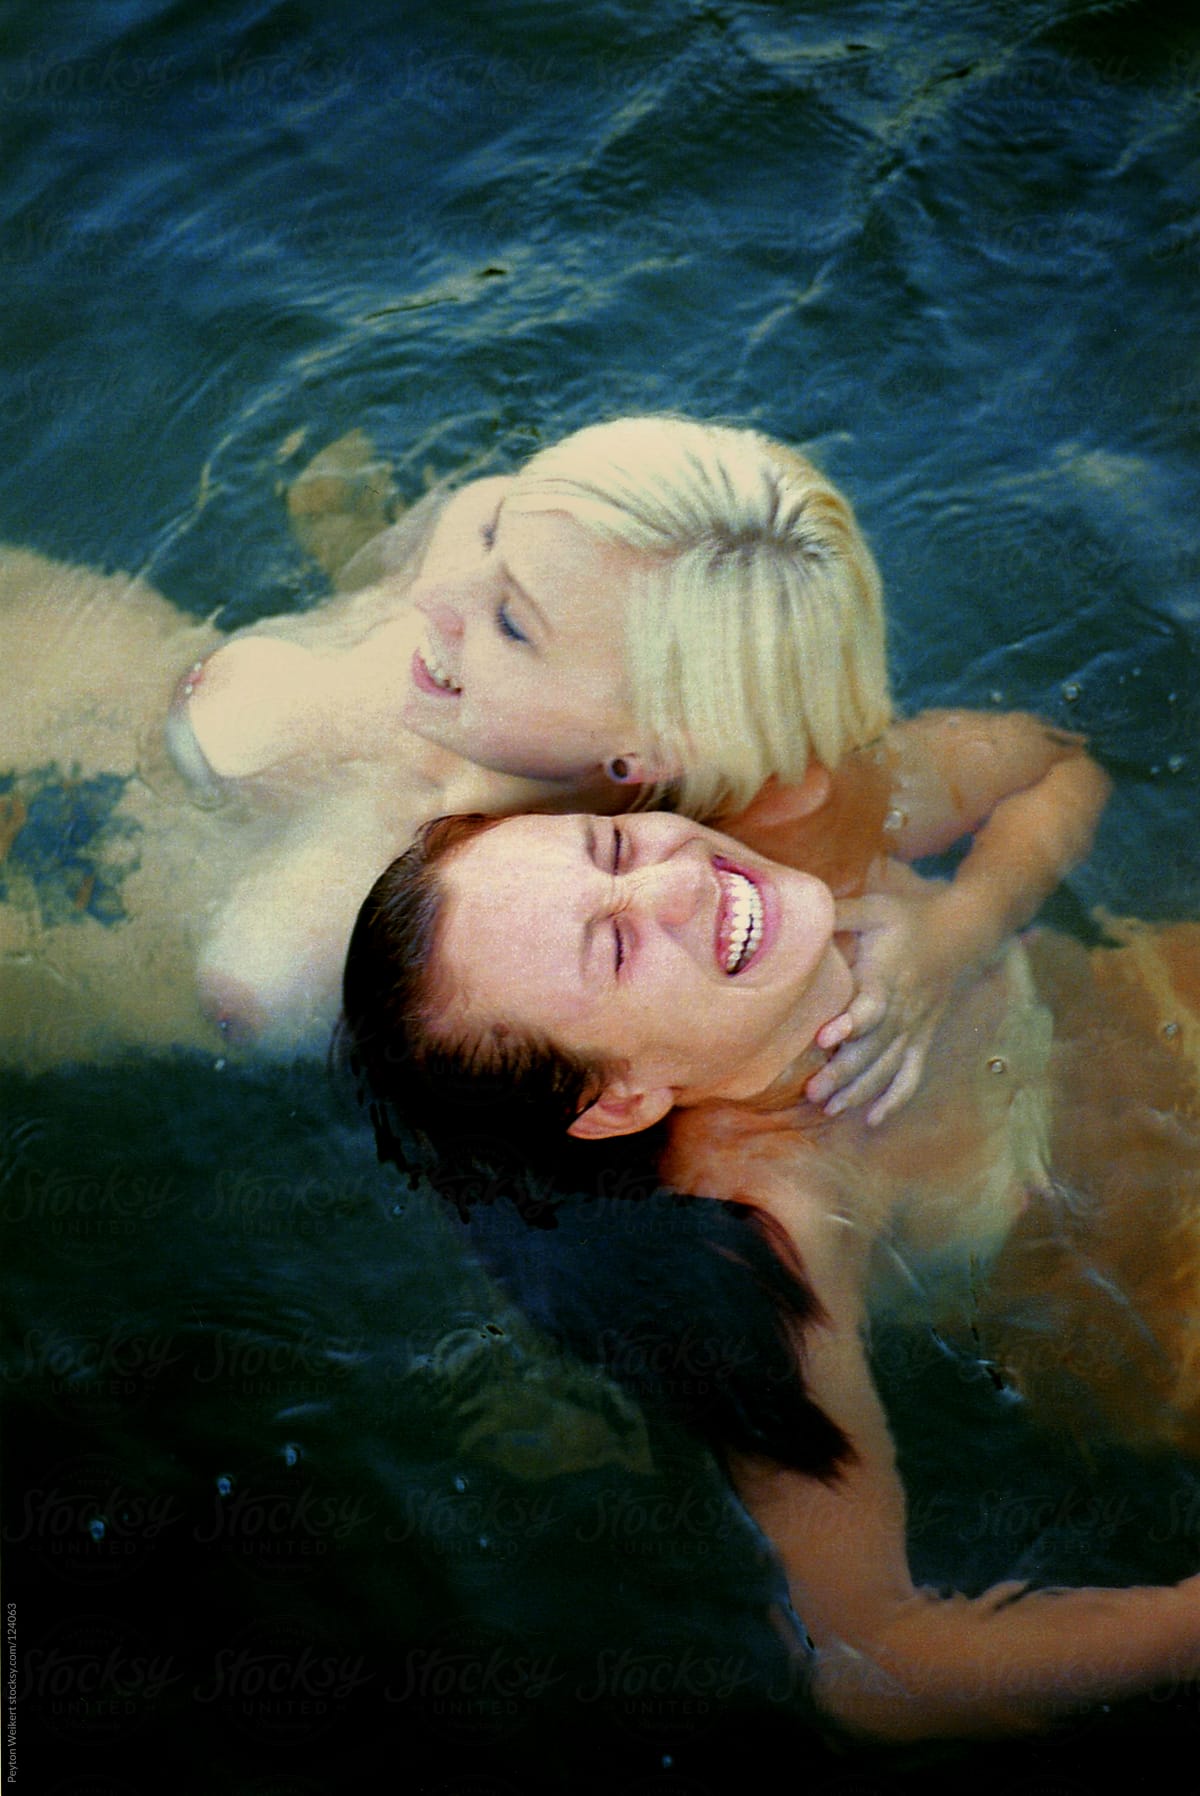 two nude young woman laugh in the water